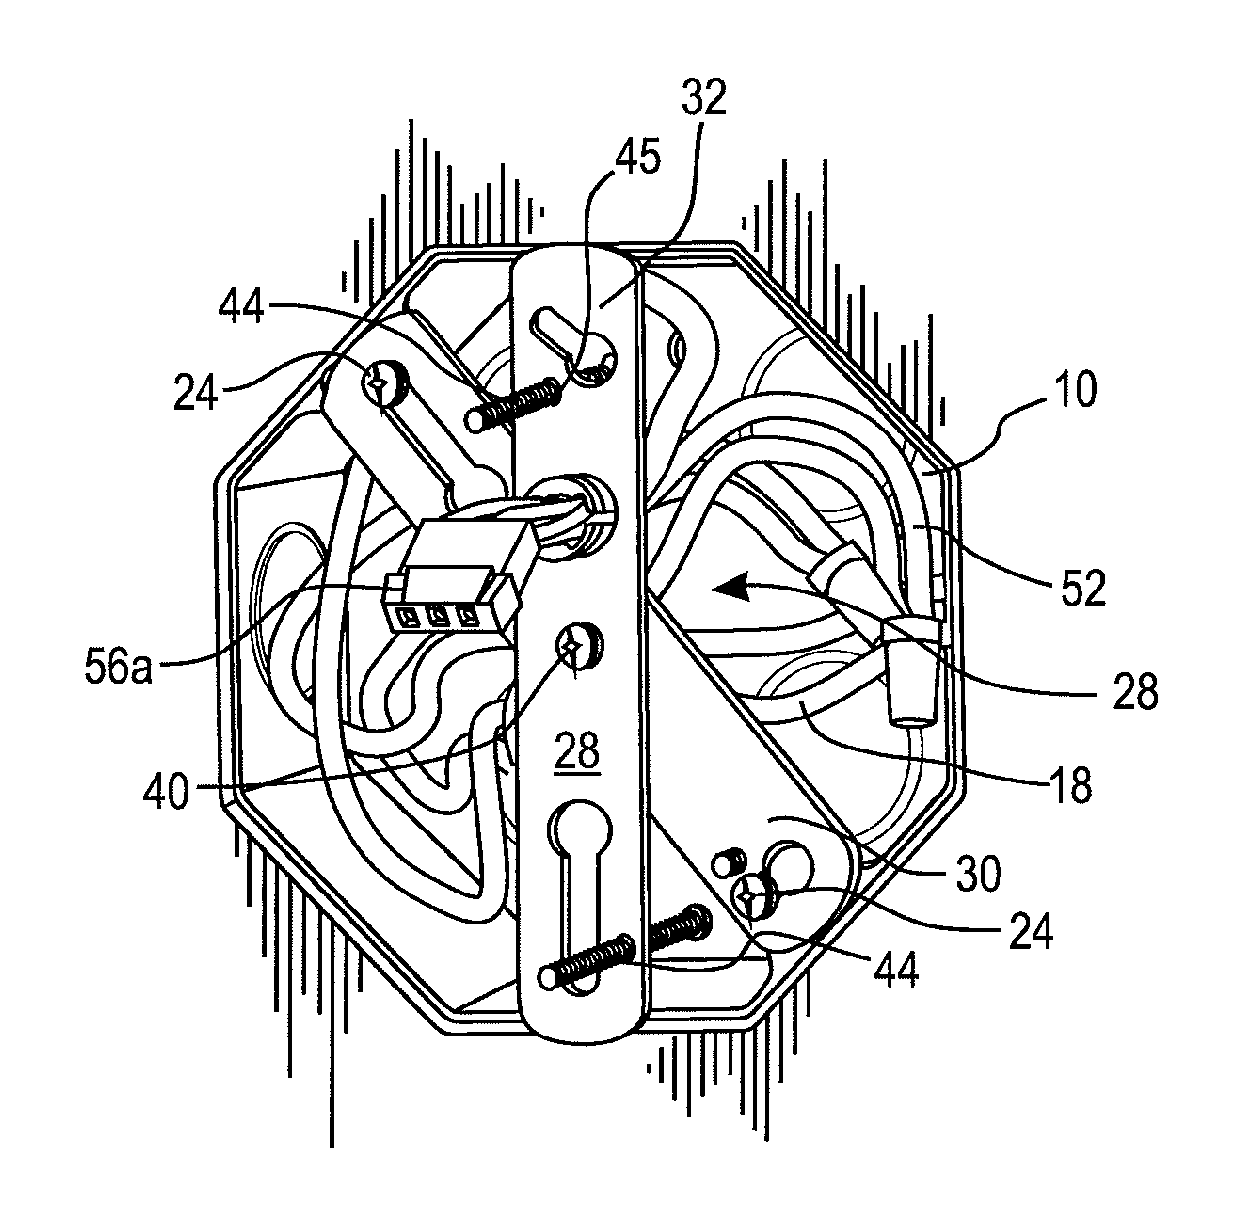 System for mounting an electrical fixture to an electrical junction box